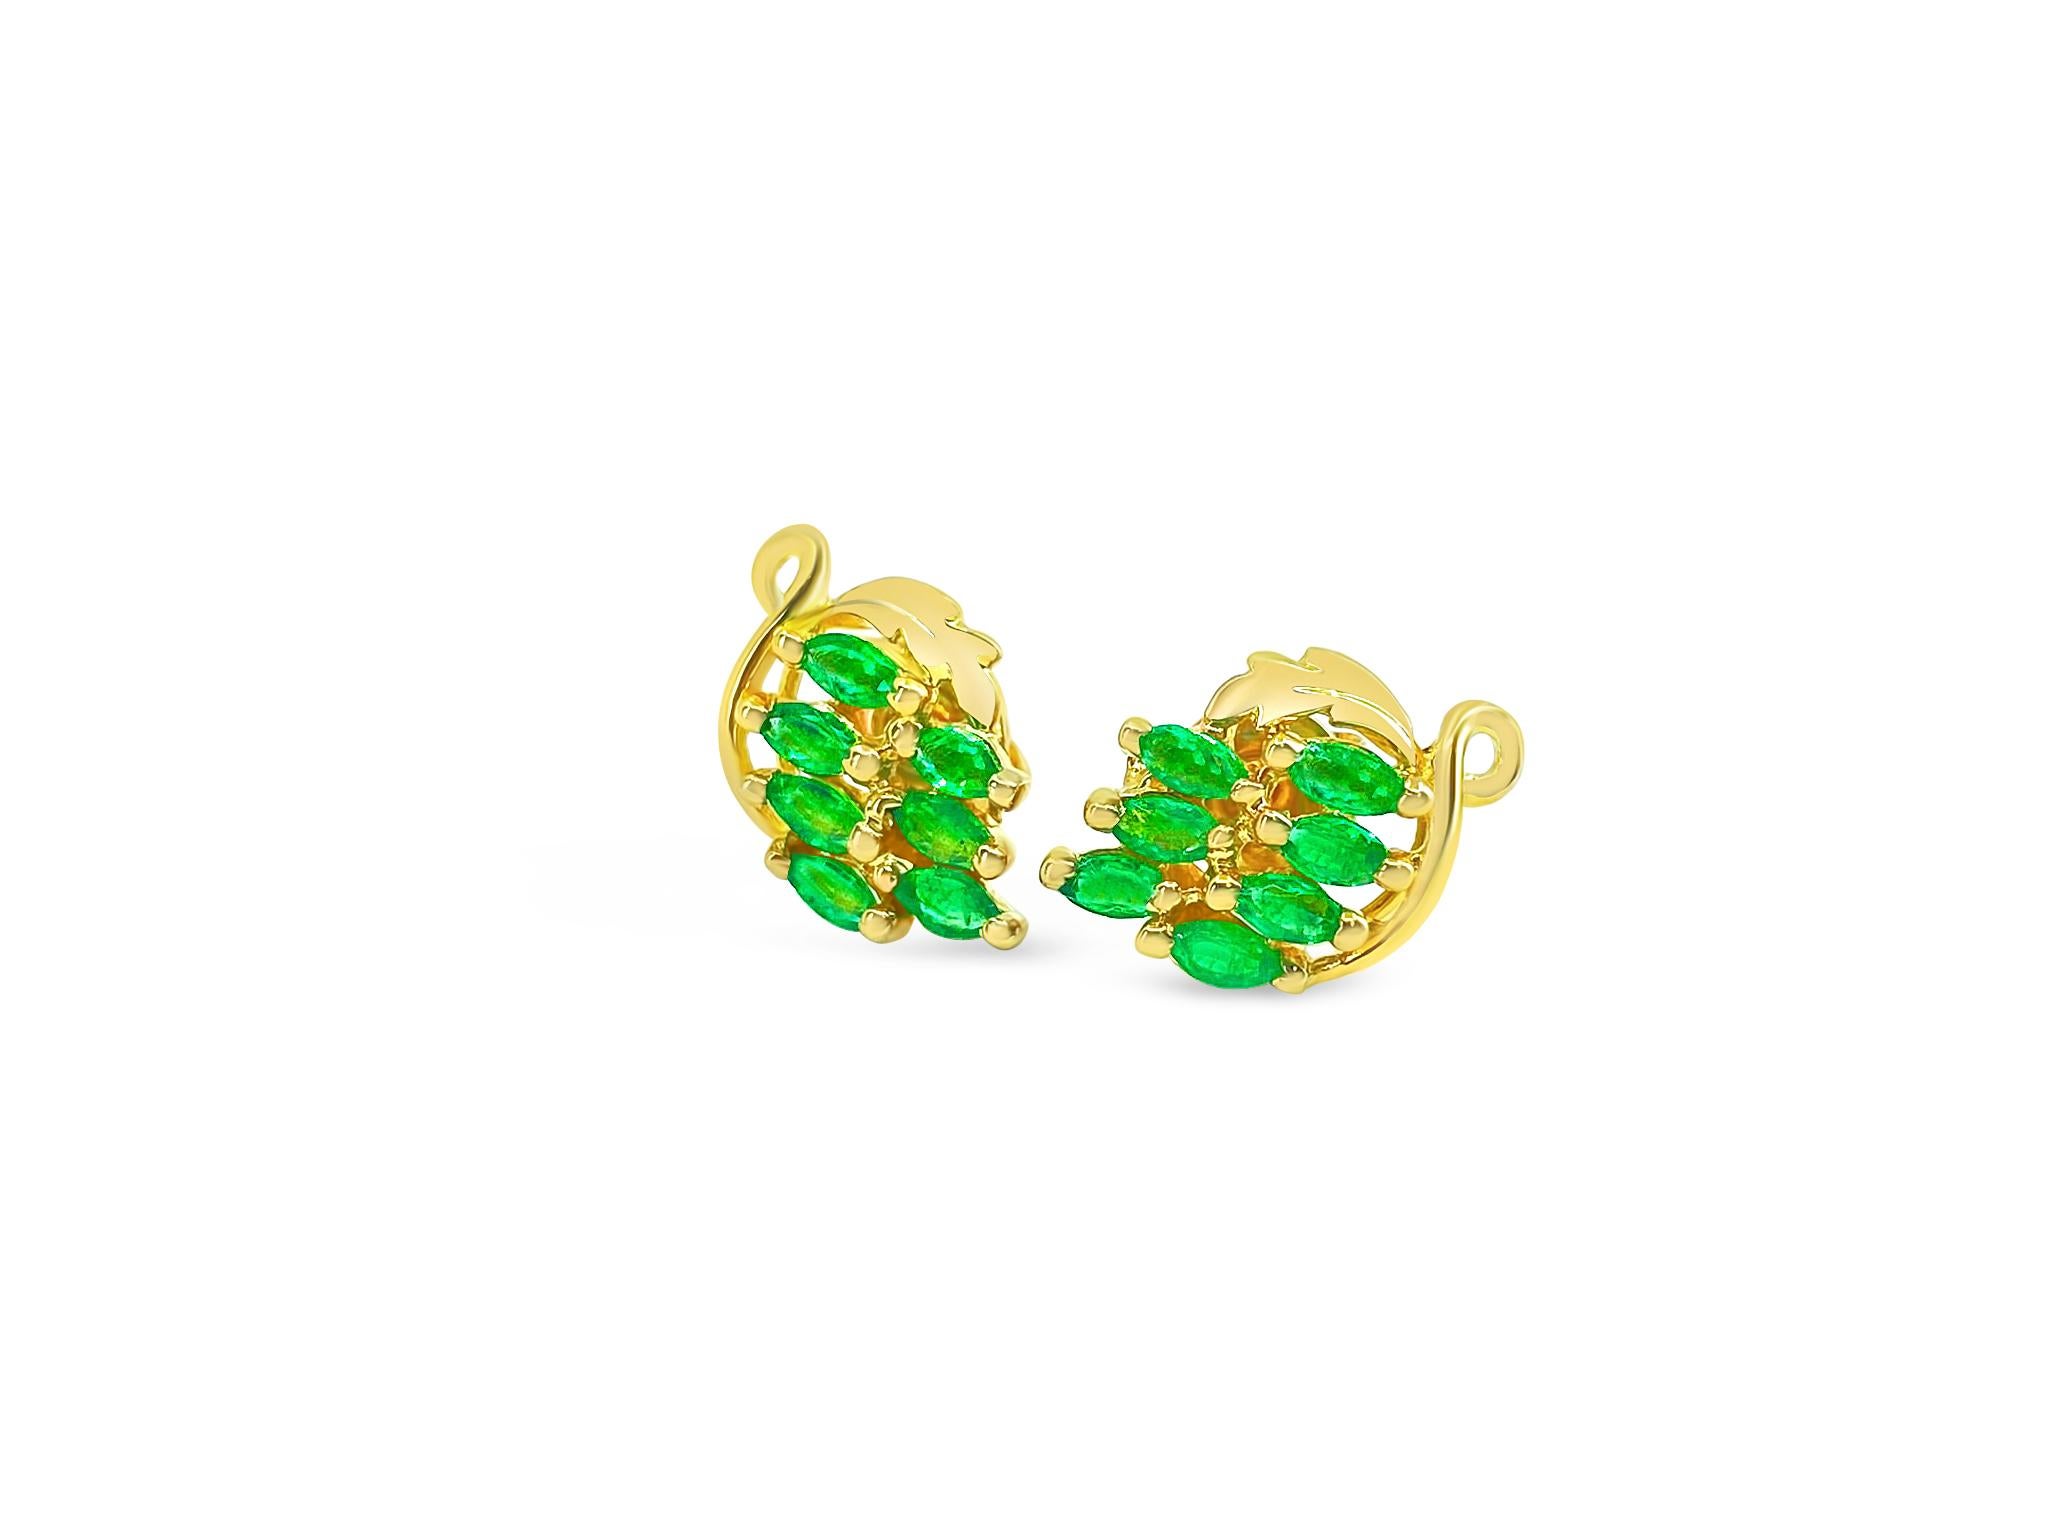 Fashioned from 14k yellow gold, these vintage stud earrings boast a total of 2.25 carats of marquise-shaped, natural earth-mined emeralds. Weighing 1.82 grams, these collectible earrings feature a timeless design and come with butterfly pushbacks